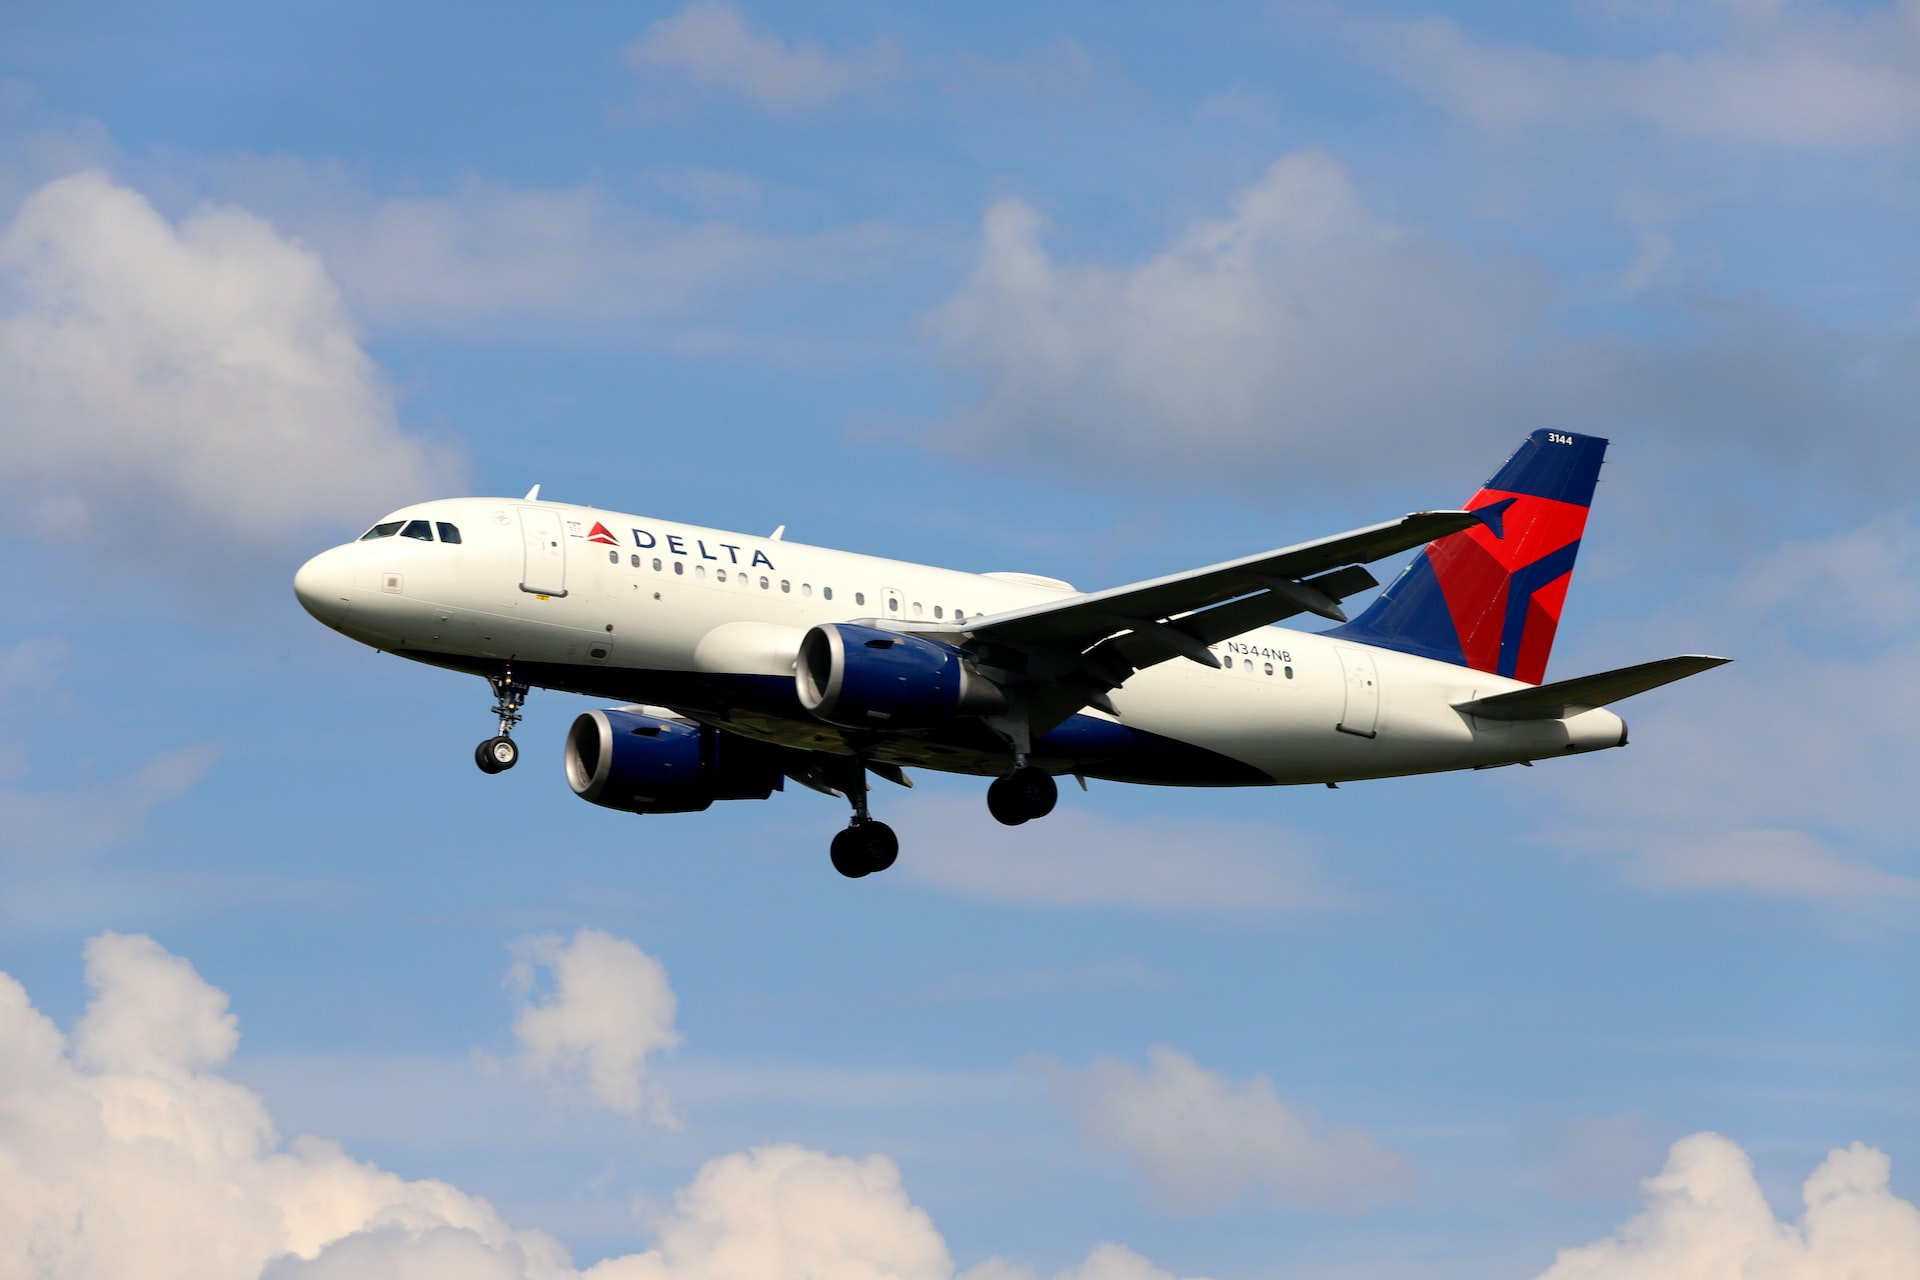 A small Delta Airlines aircraft landing on a sunny day.